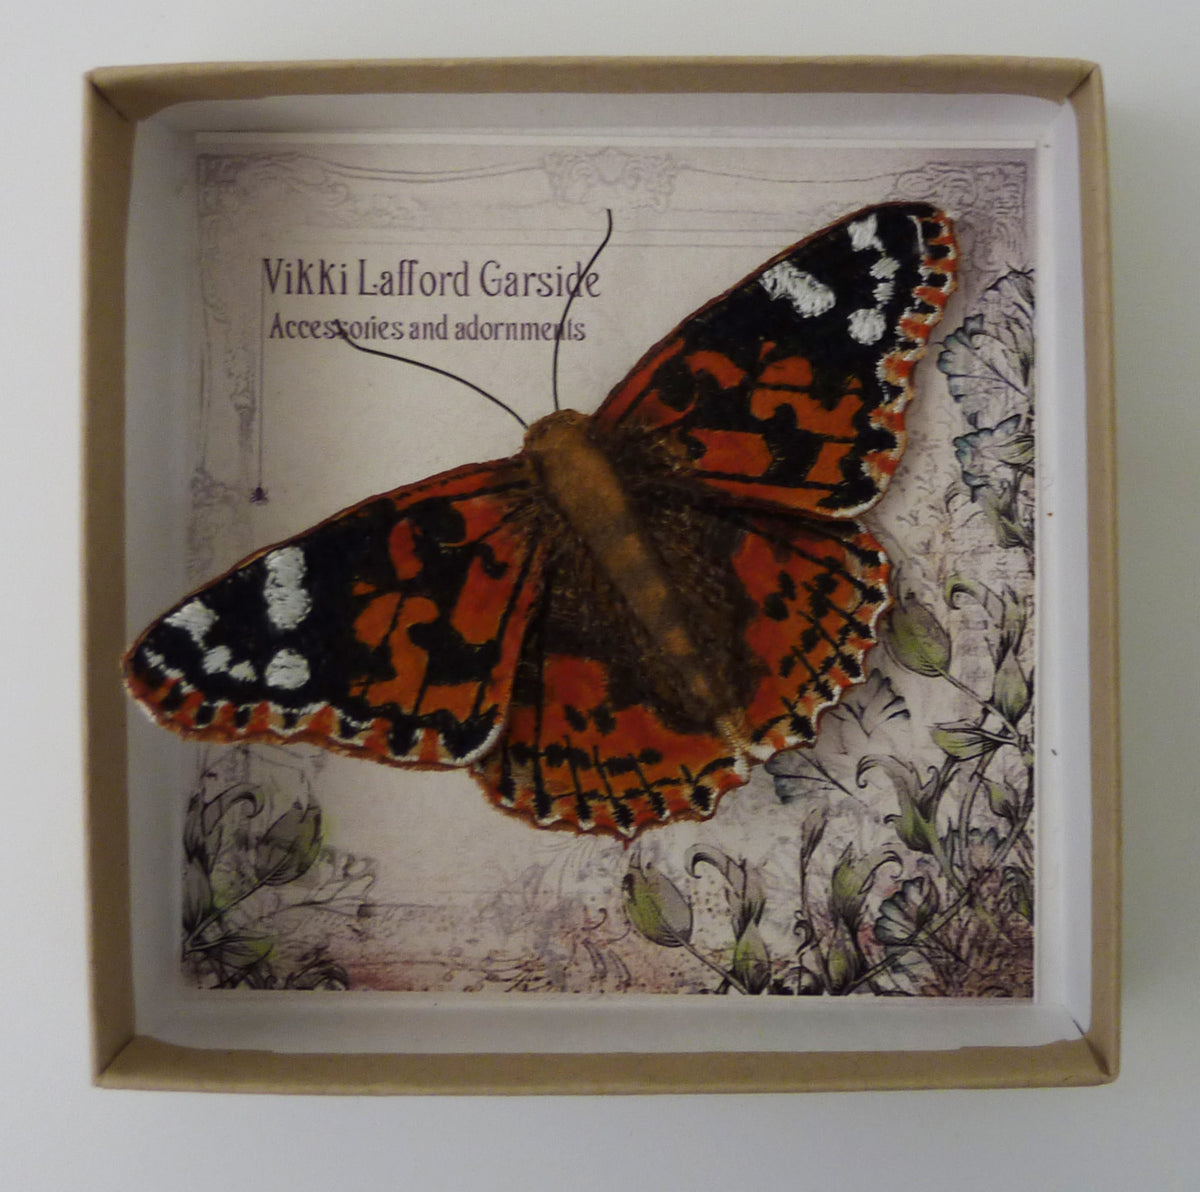 Painted Lady by Vikki Lafford Garside